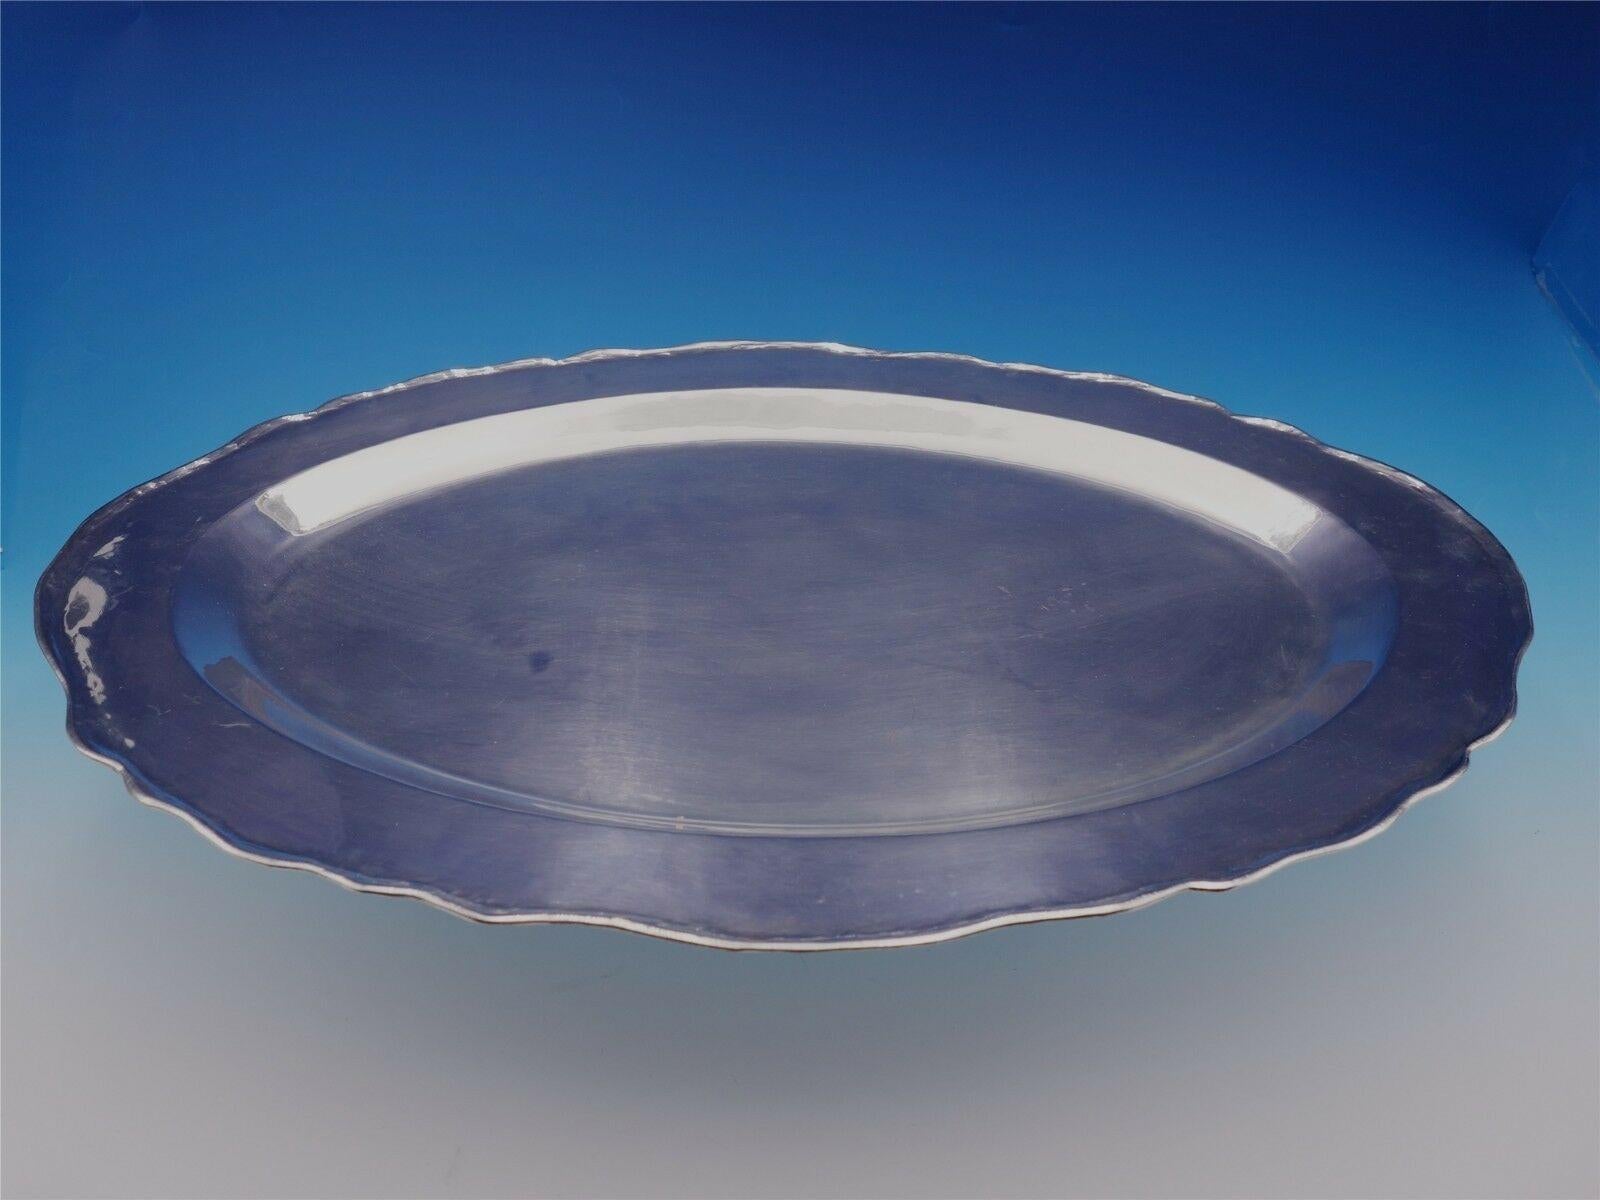 Colonial by Camusso

Marvelous Colonial by Camusso .825 silver oval serving platter. This piece measures 23